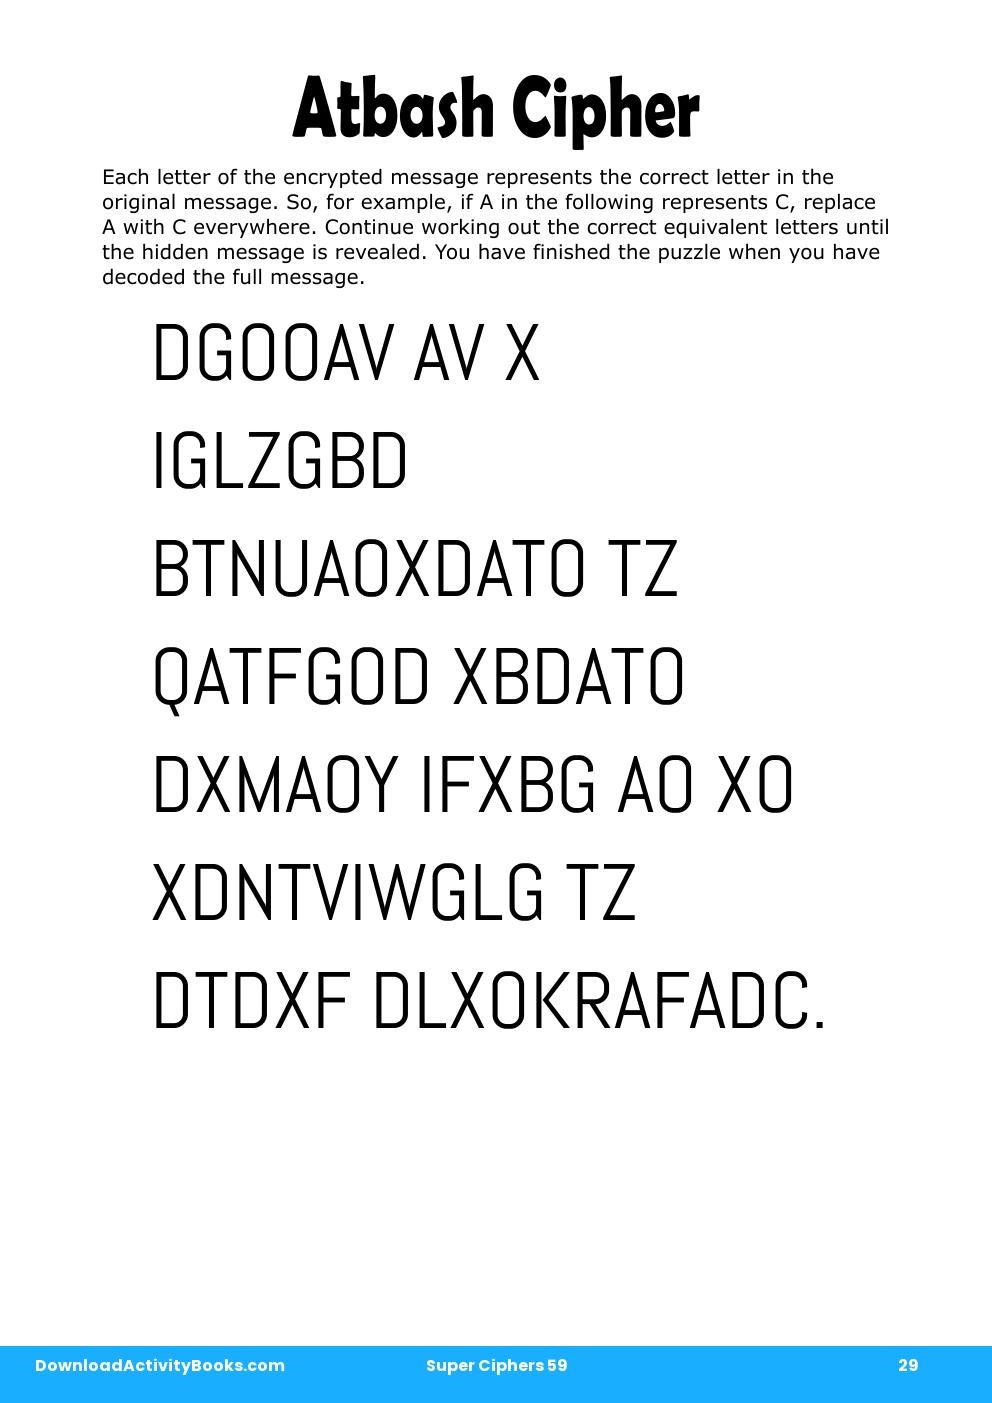 Atbash Cipher in Super Ciphers 59